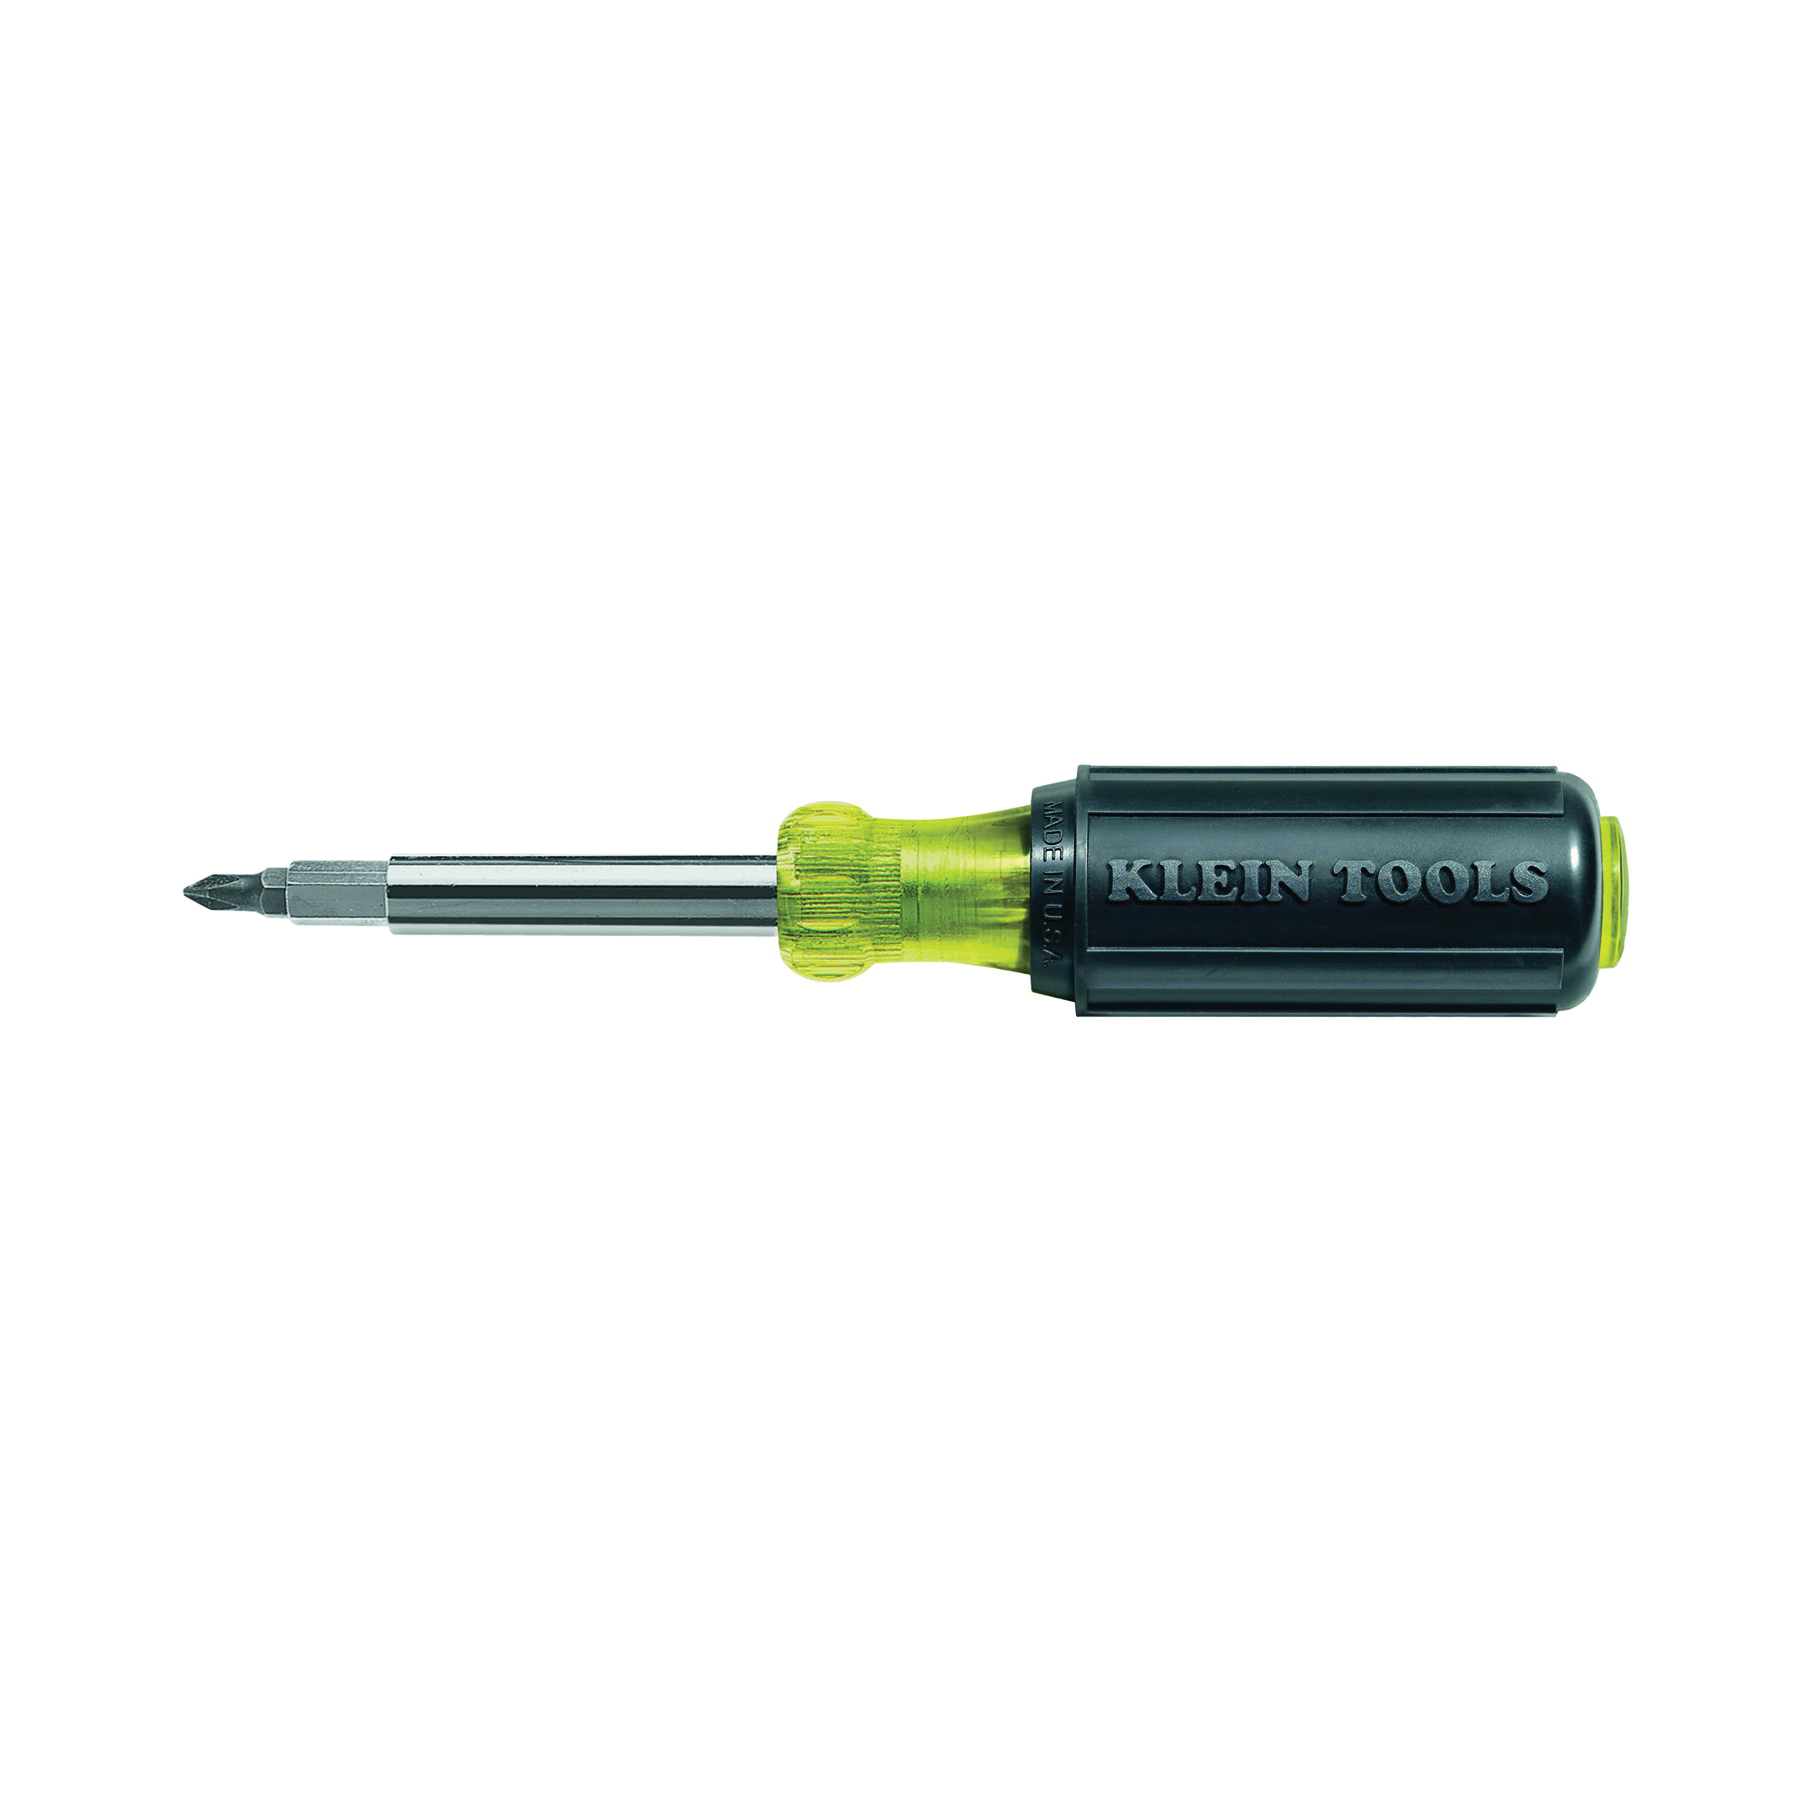 KLEIN TOOLS® 32477 Screwdriver and Nut Driver, Phillips, Square, Slotted Point, 7-3/4 in OAL, Cushion Grip Handle